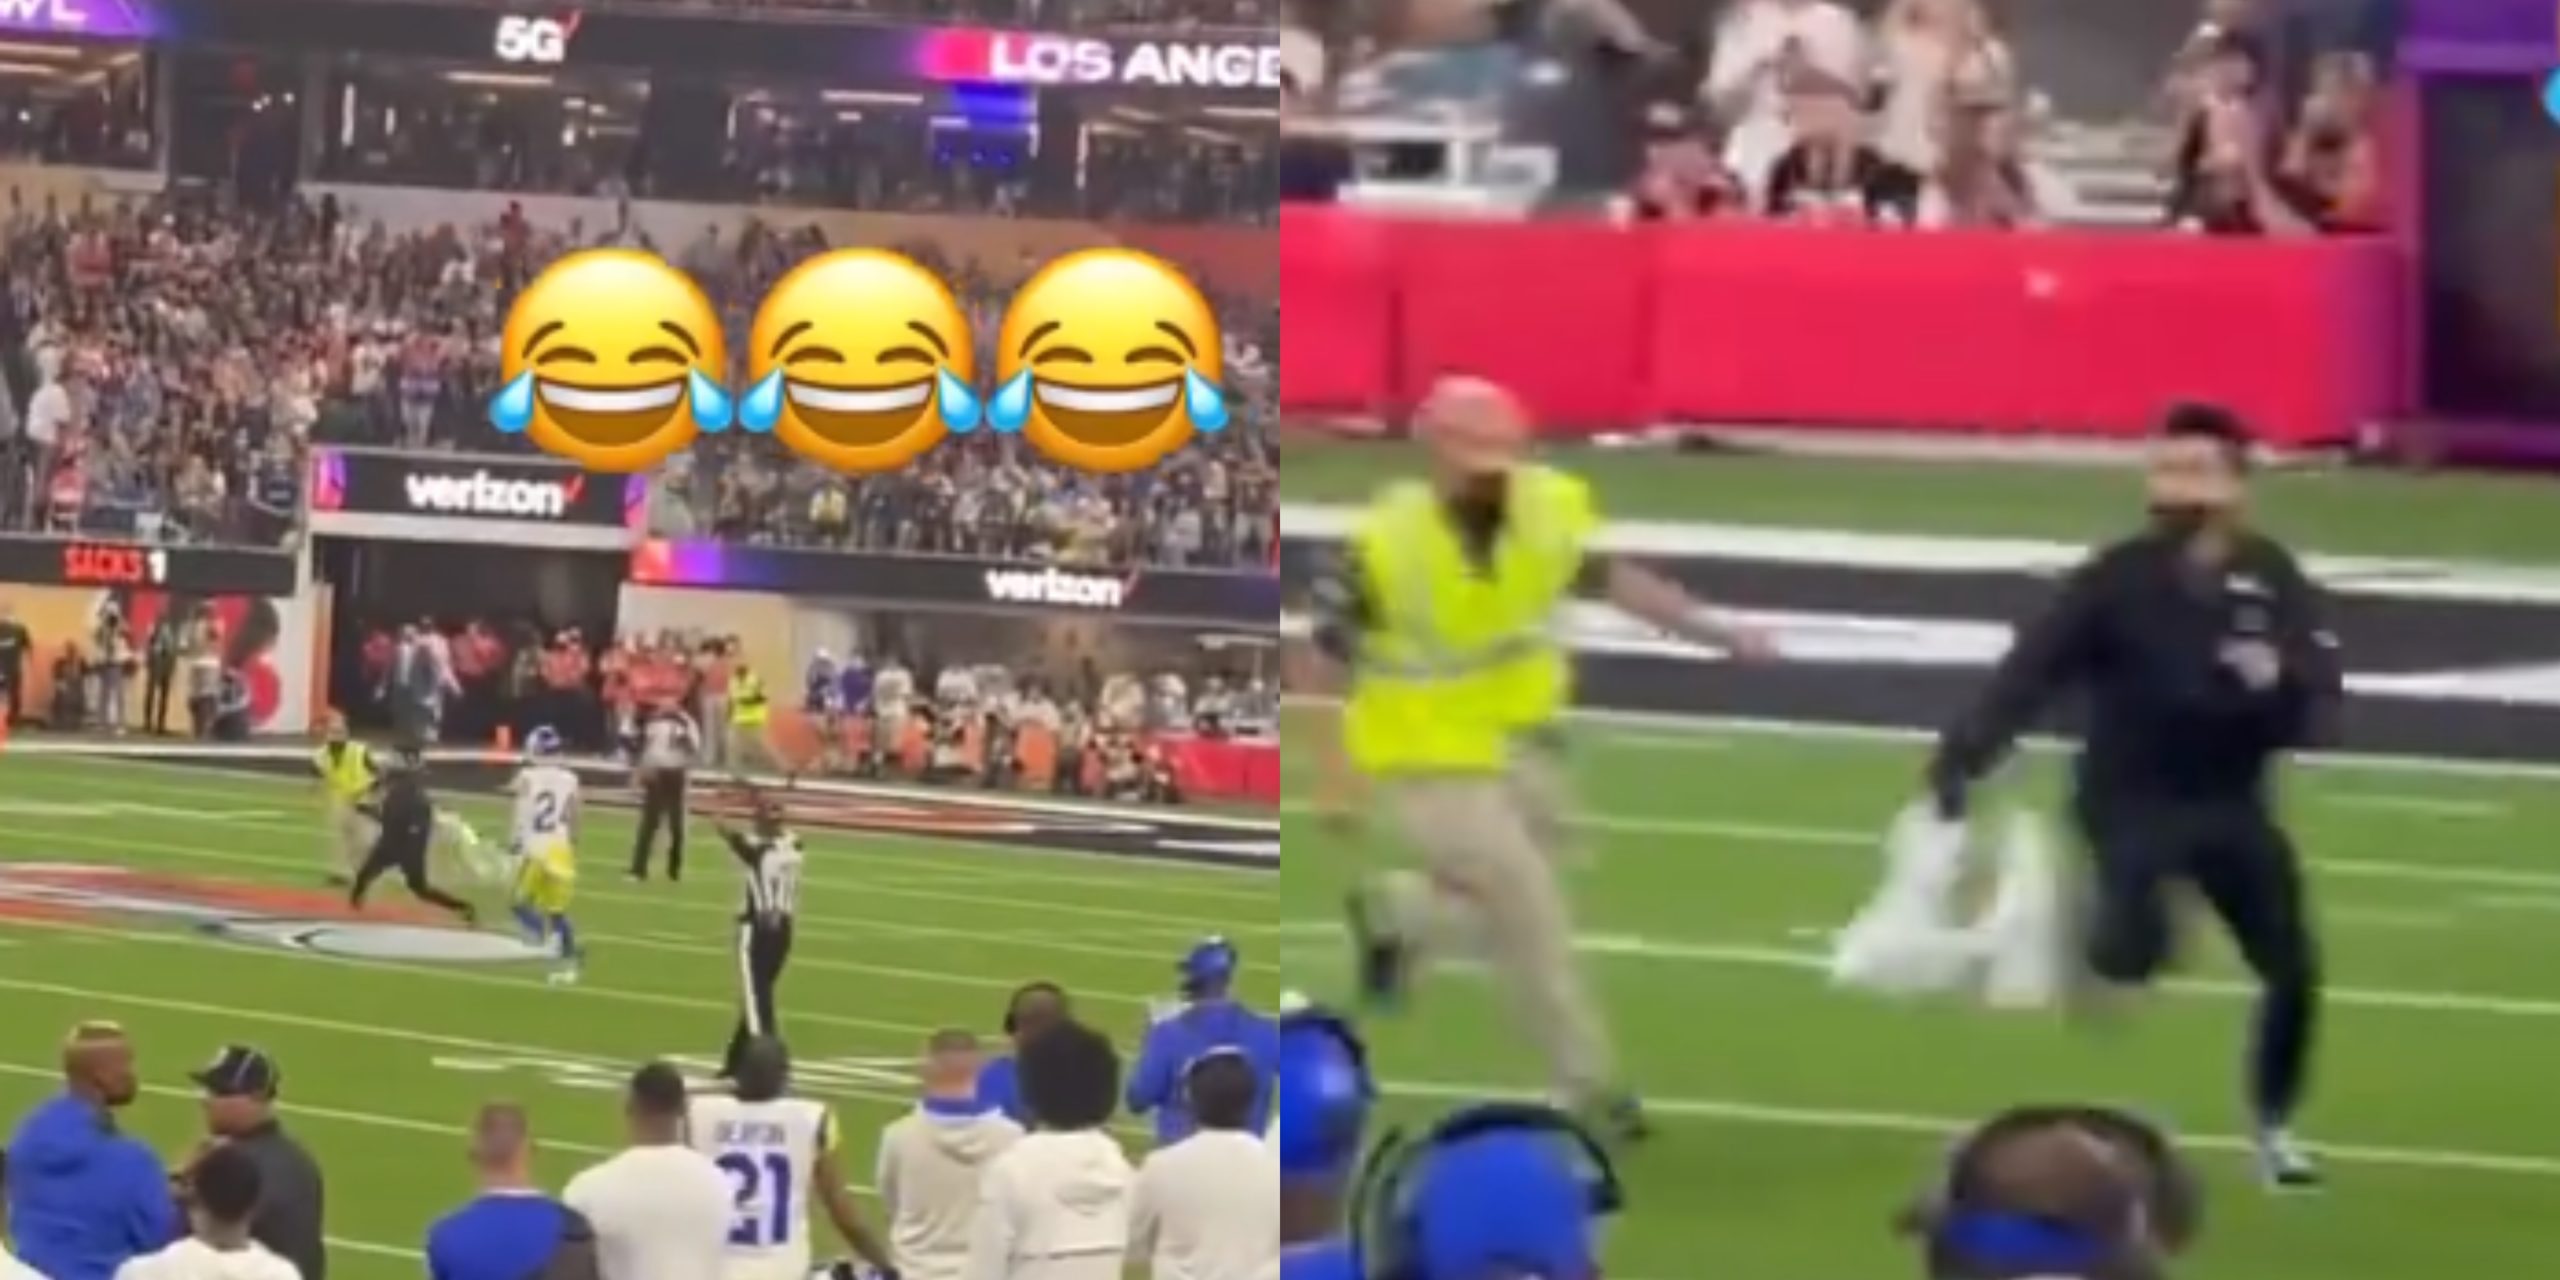 Closer Footage Shows Rams’ Taylor Rapp Chasing Fan On Field Before